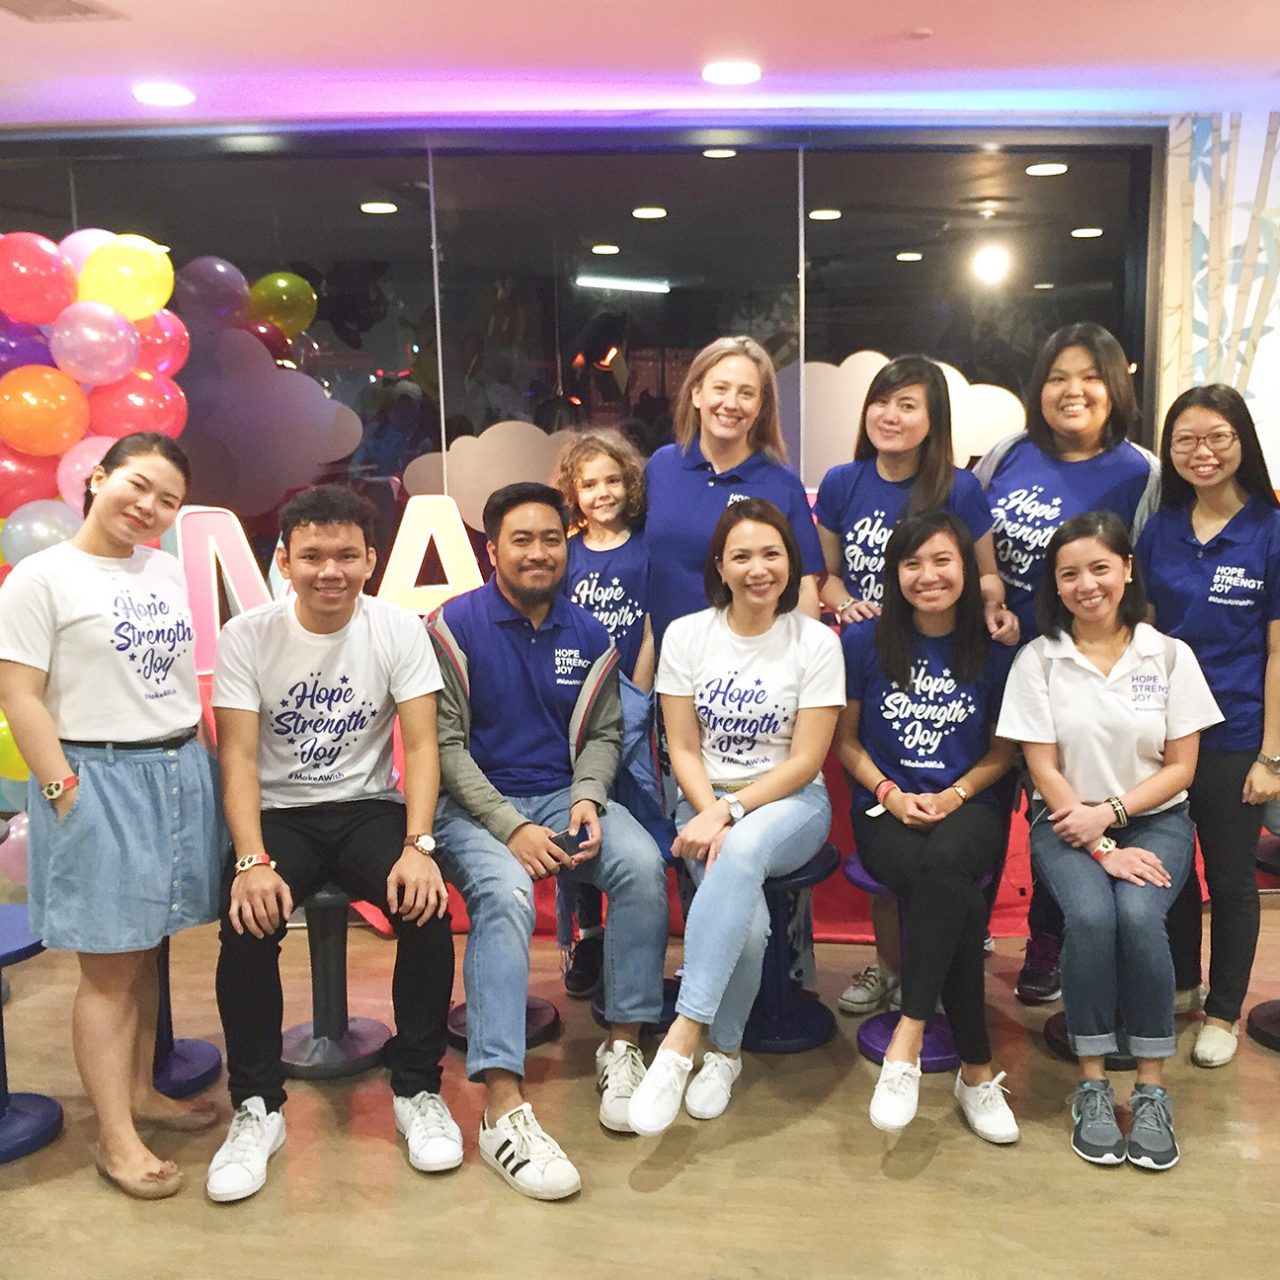 Staff in Manila sold t-shirts to raise money for the children’s charity Make a Wish Foundation